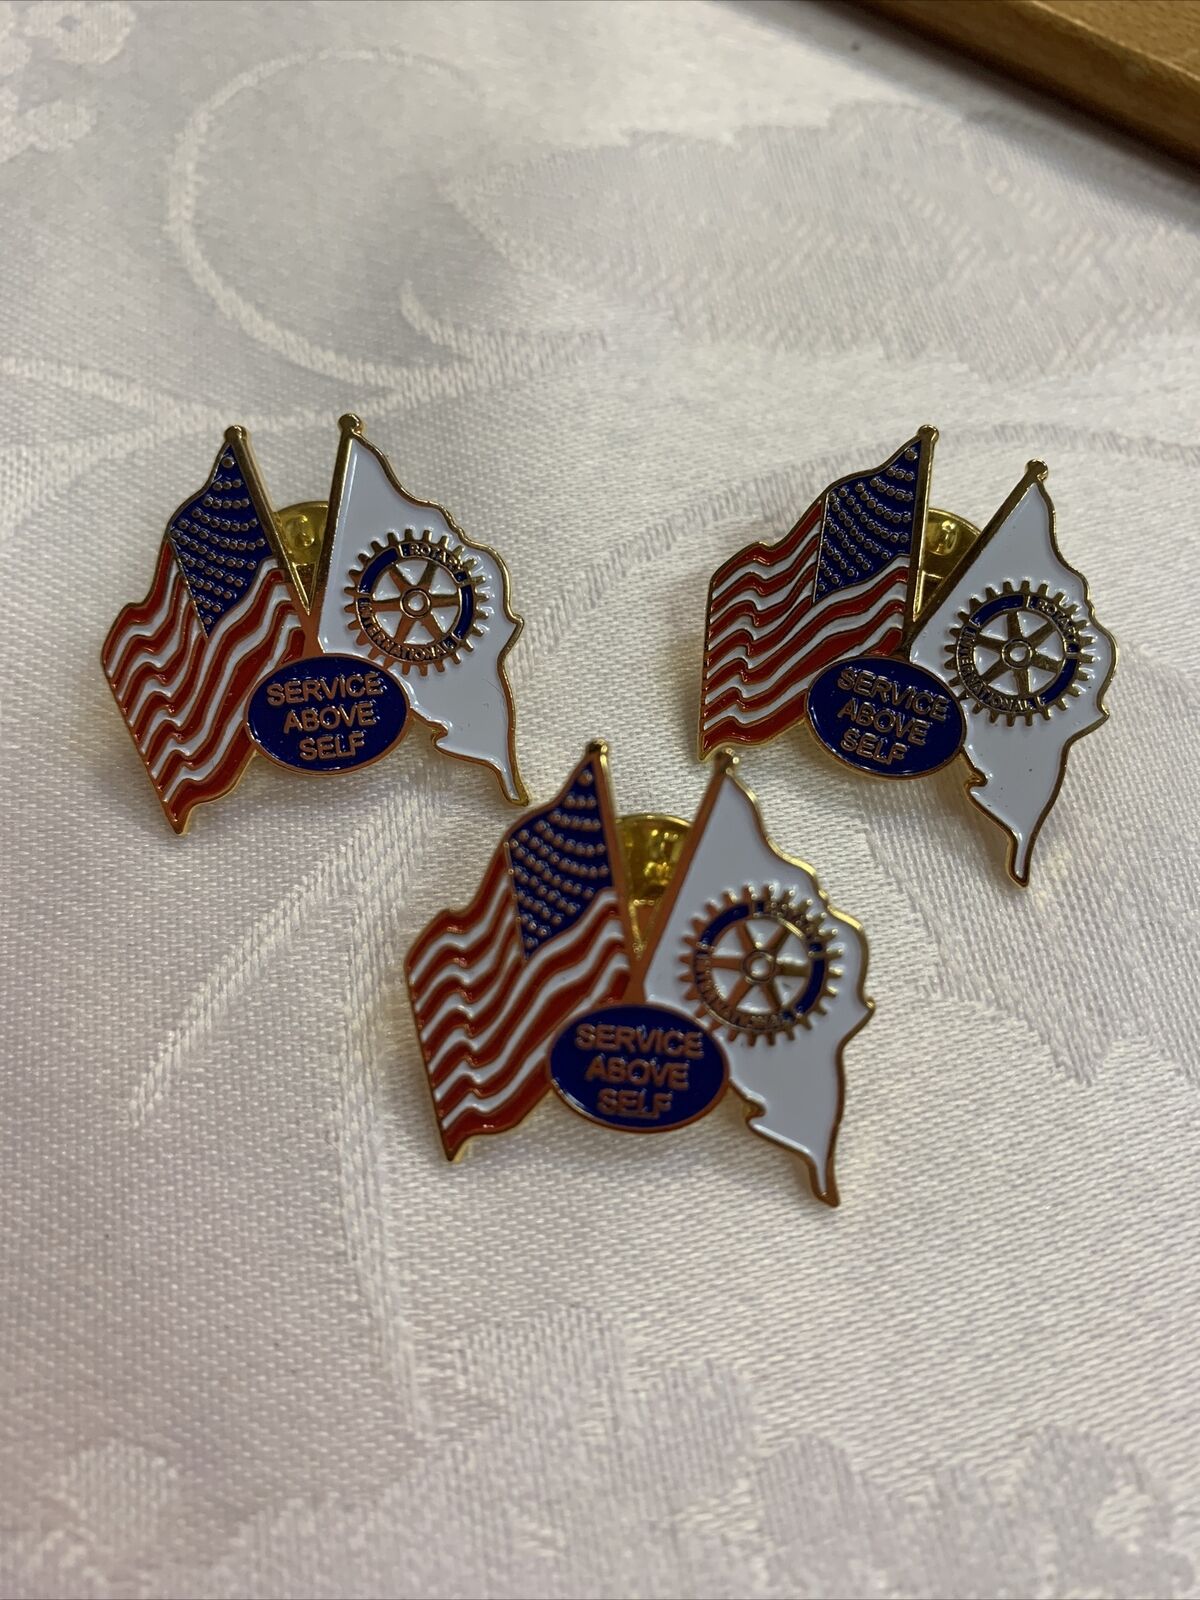 S2-rotary International Pin Service Above Self With Us And Rotary Flag Lot Of 3